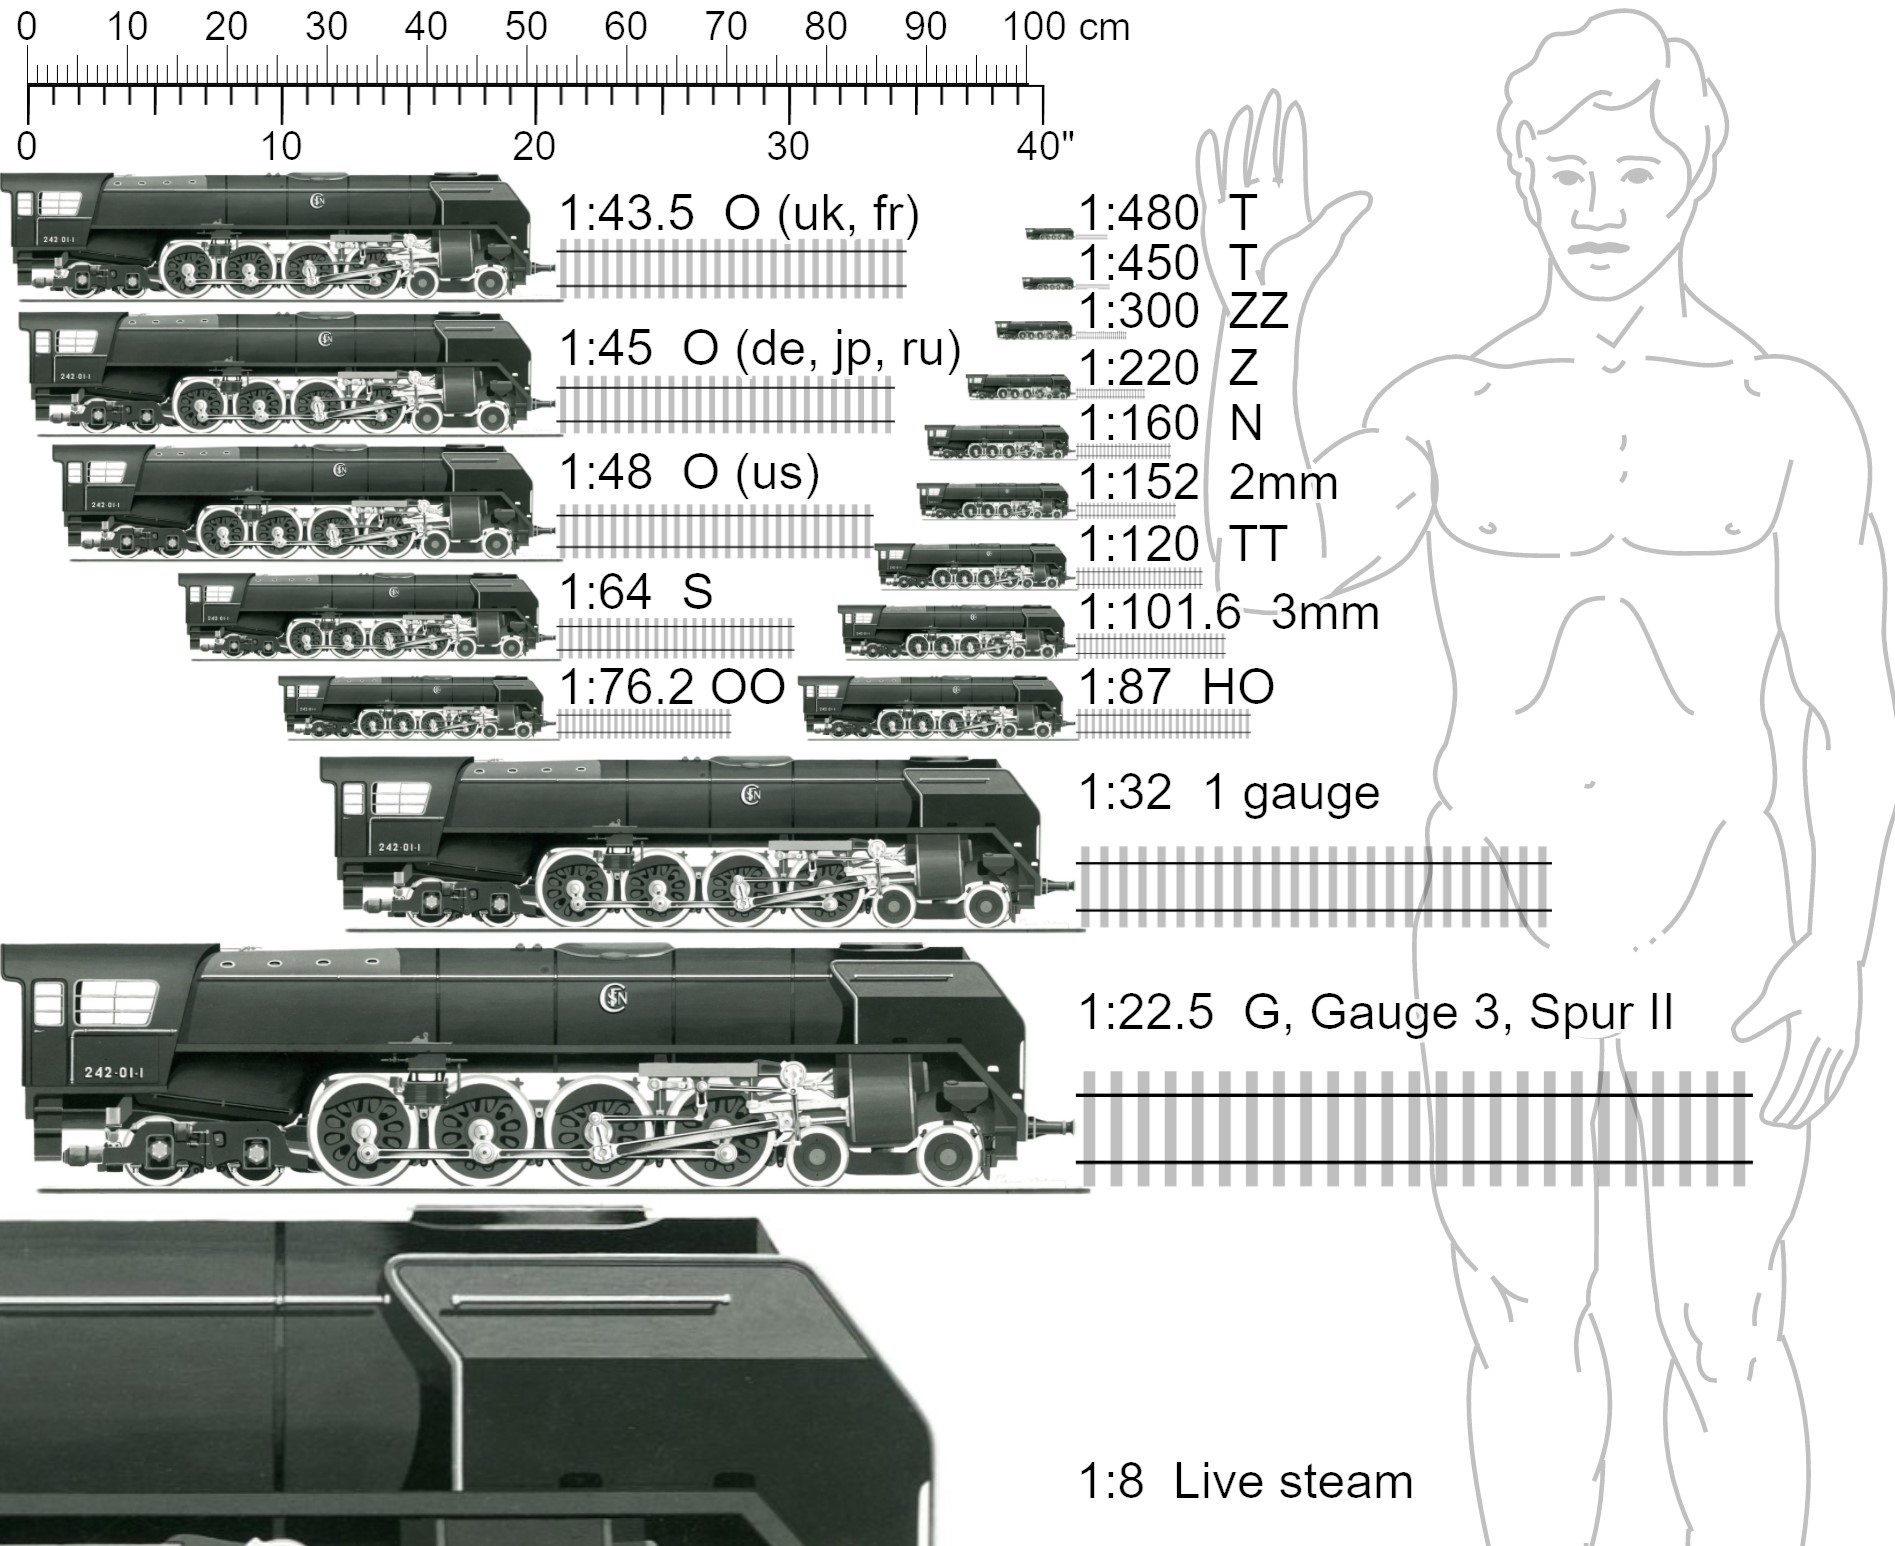 model-train-scales-what-they-mean-midwest-model-railroad